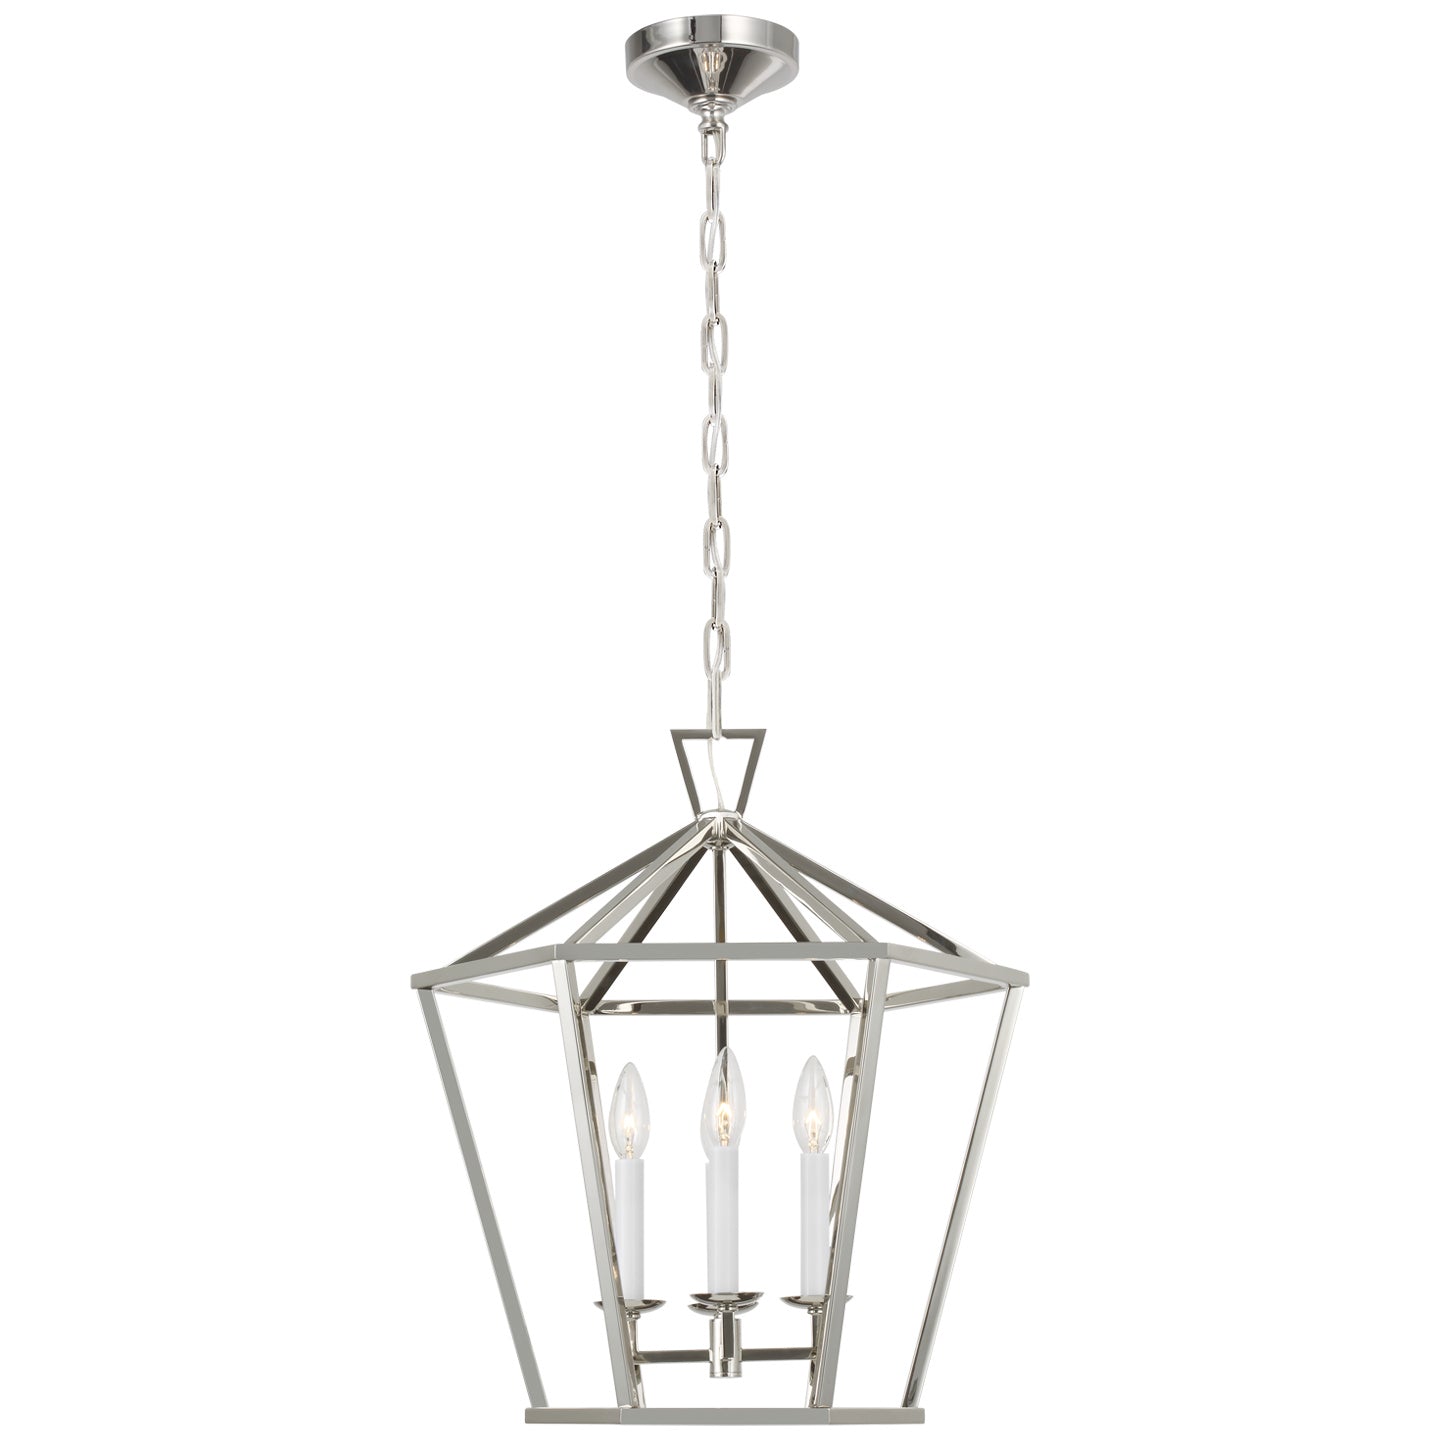 Load image into Gallery viewer, Visual Comfort Signature - CHC 5227PN - LED Lantern - Darlana Hex - Polished Nickel
